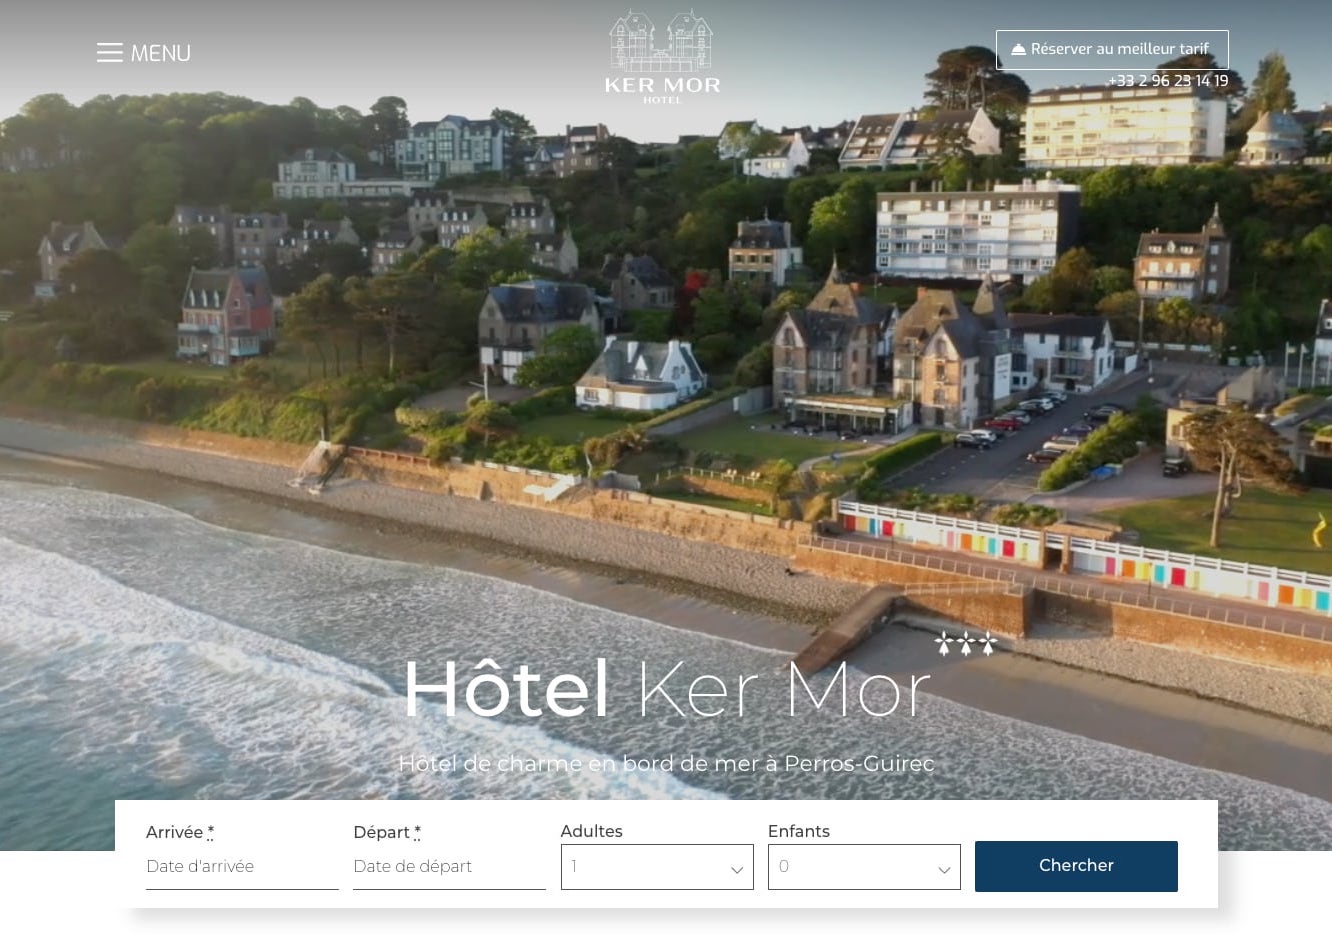 Website design for a hotel in Brittany